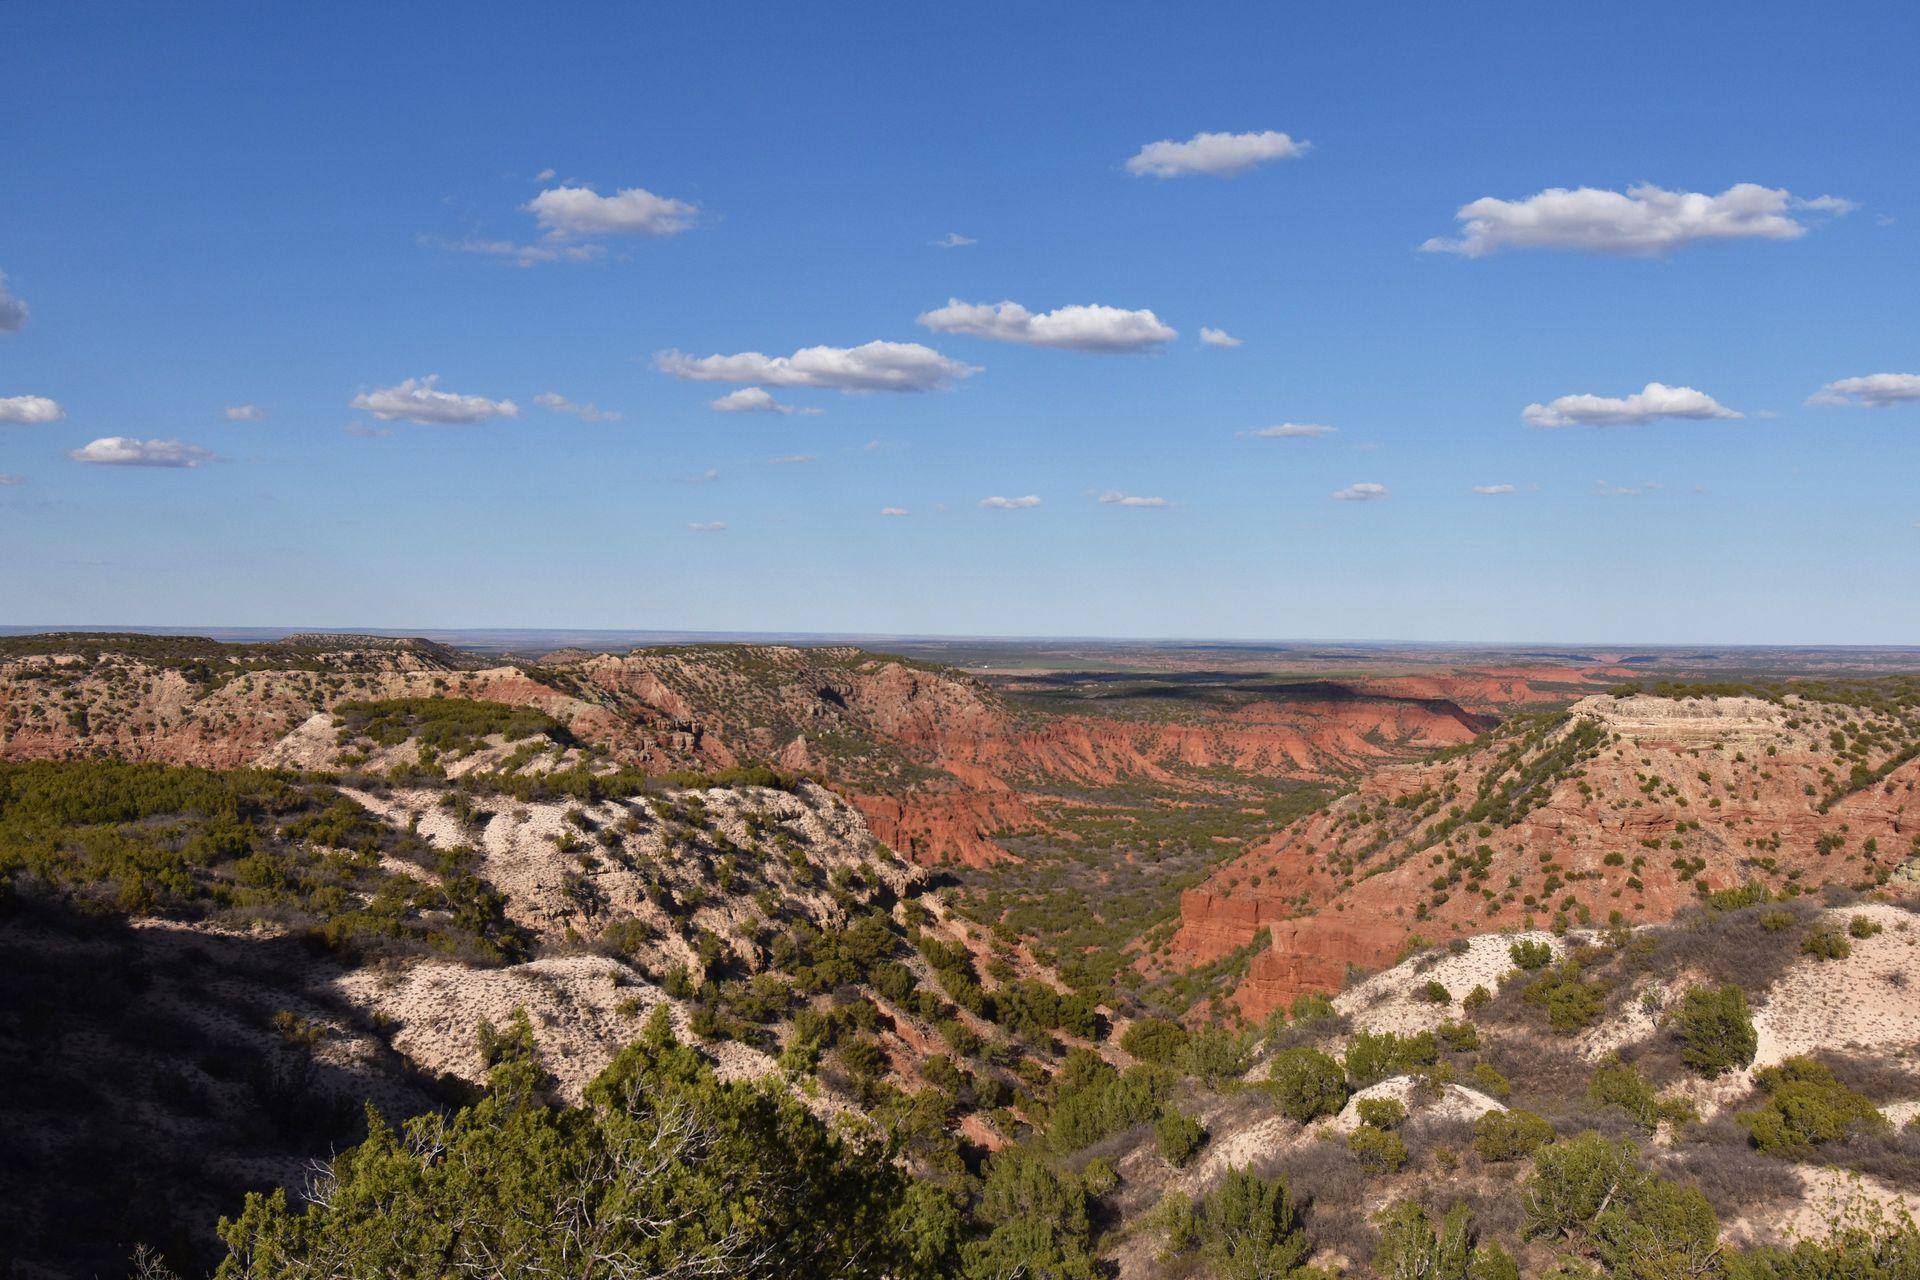 A view of a canyon full of orange and white rocks and greenery from the Haynes Ridge Overlook.